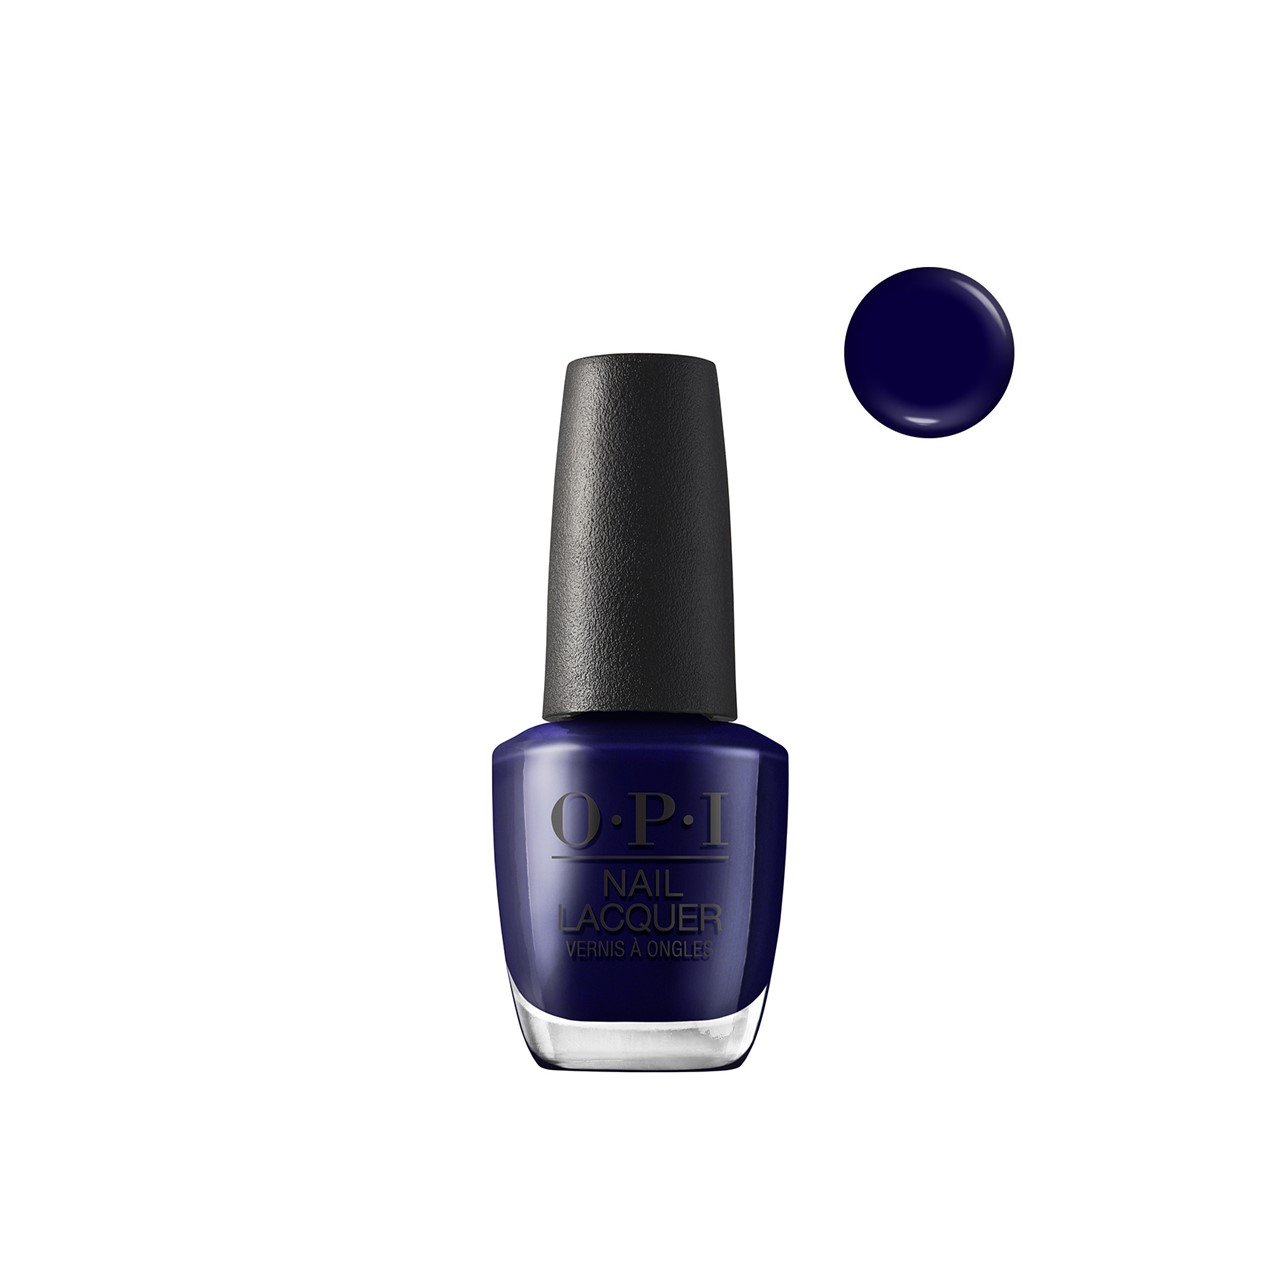 OPI Nail Lacquer Award for Best Nails Goes To… 15ml